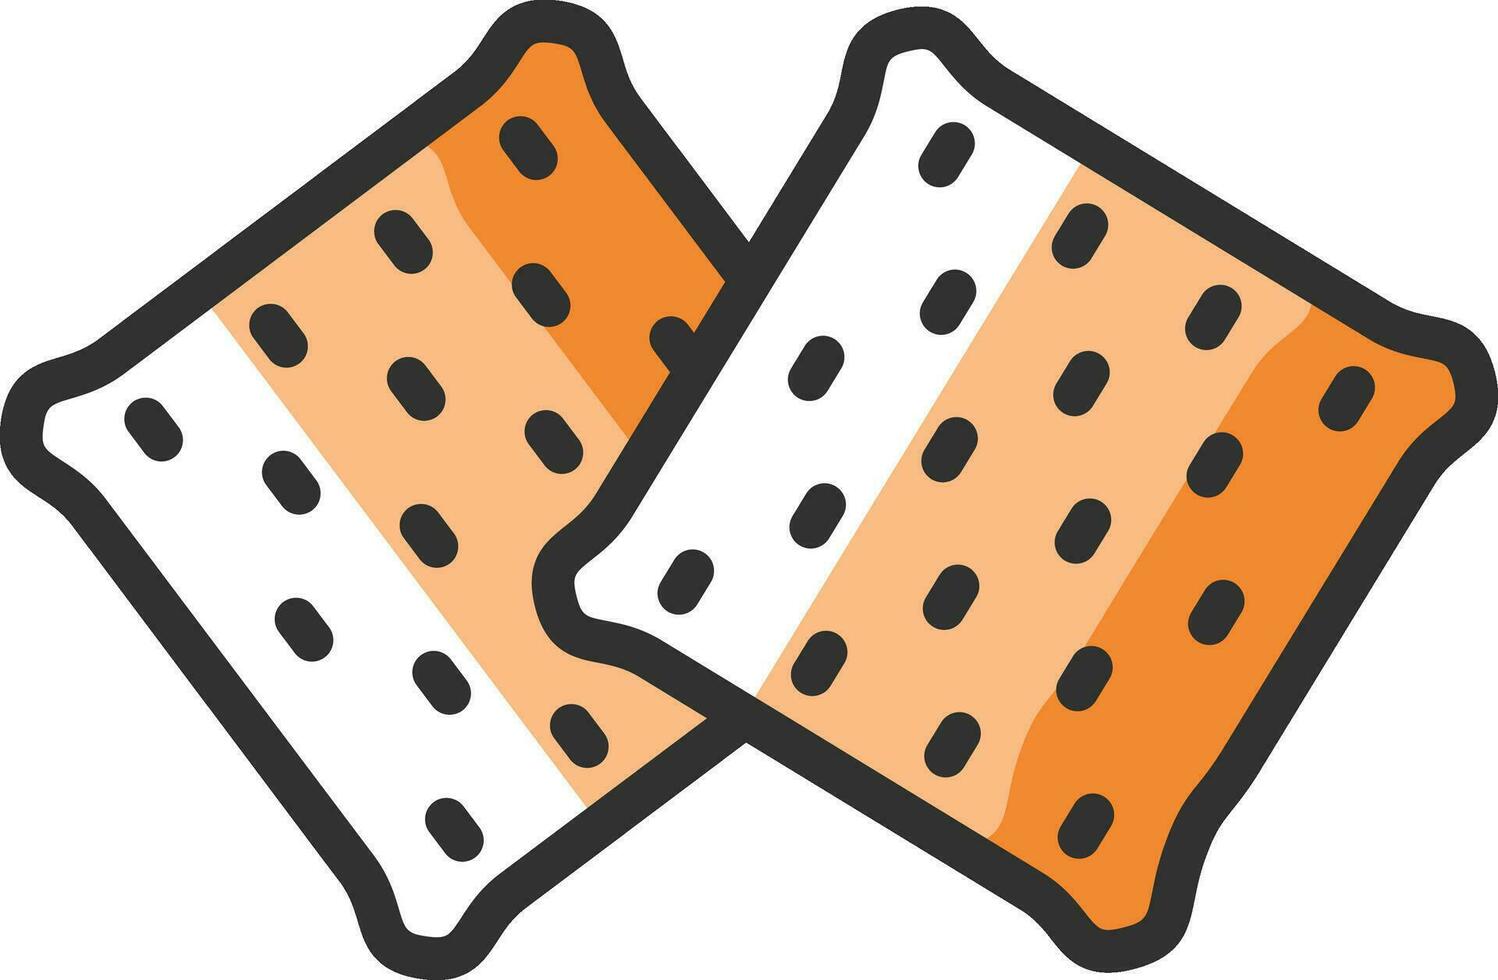 Vector illustration of Square shape biscuits or cookies icon.